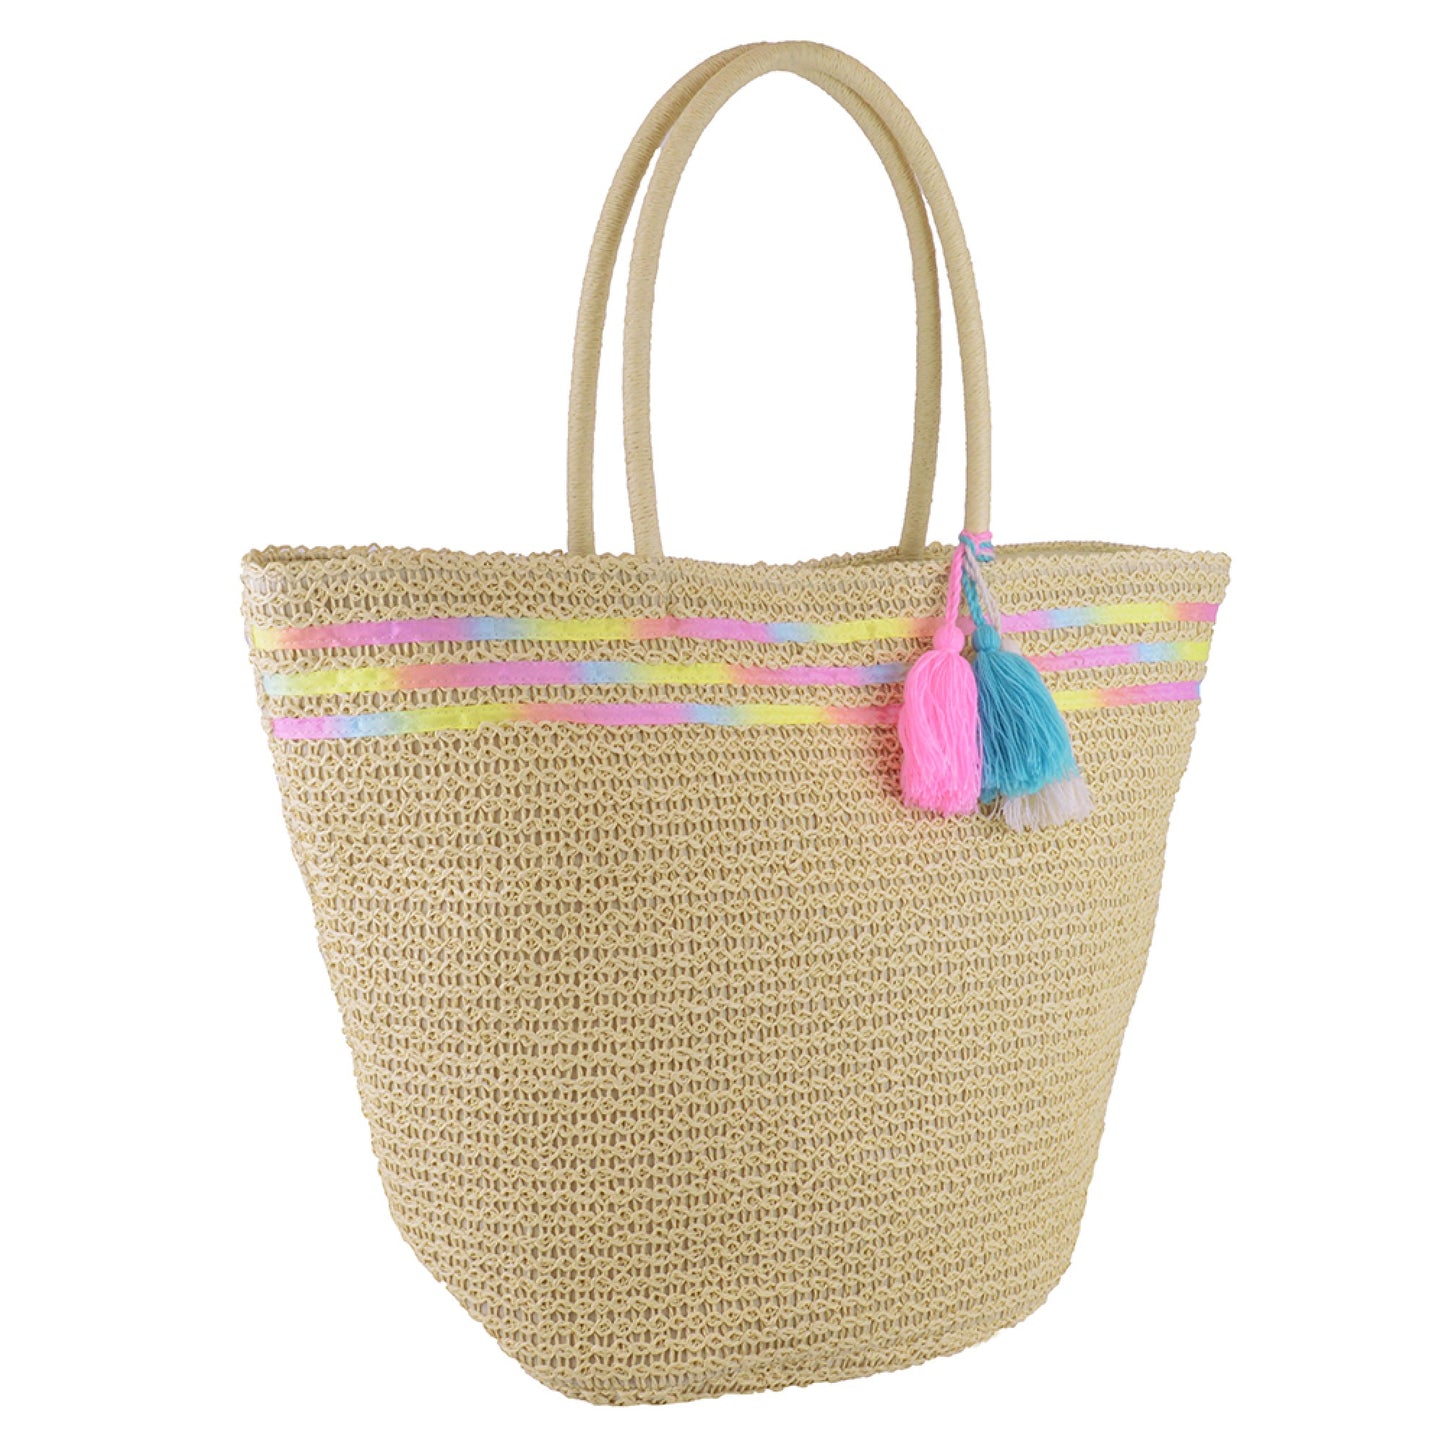 Cream Paper Straw Summer Tote Beach Bag with Pom Poms